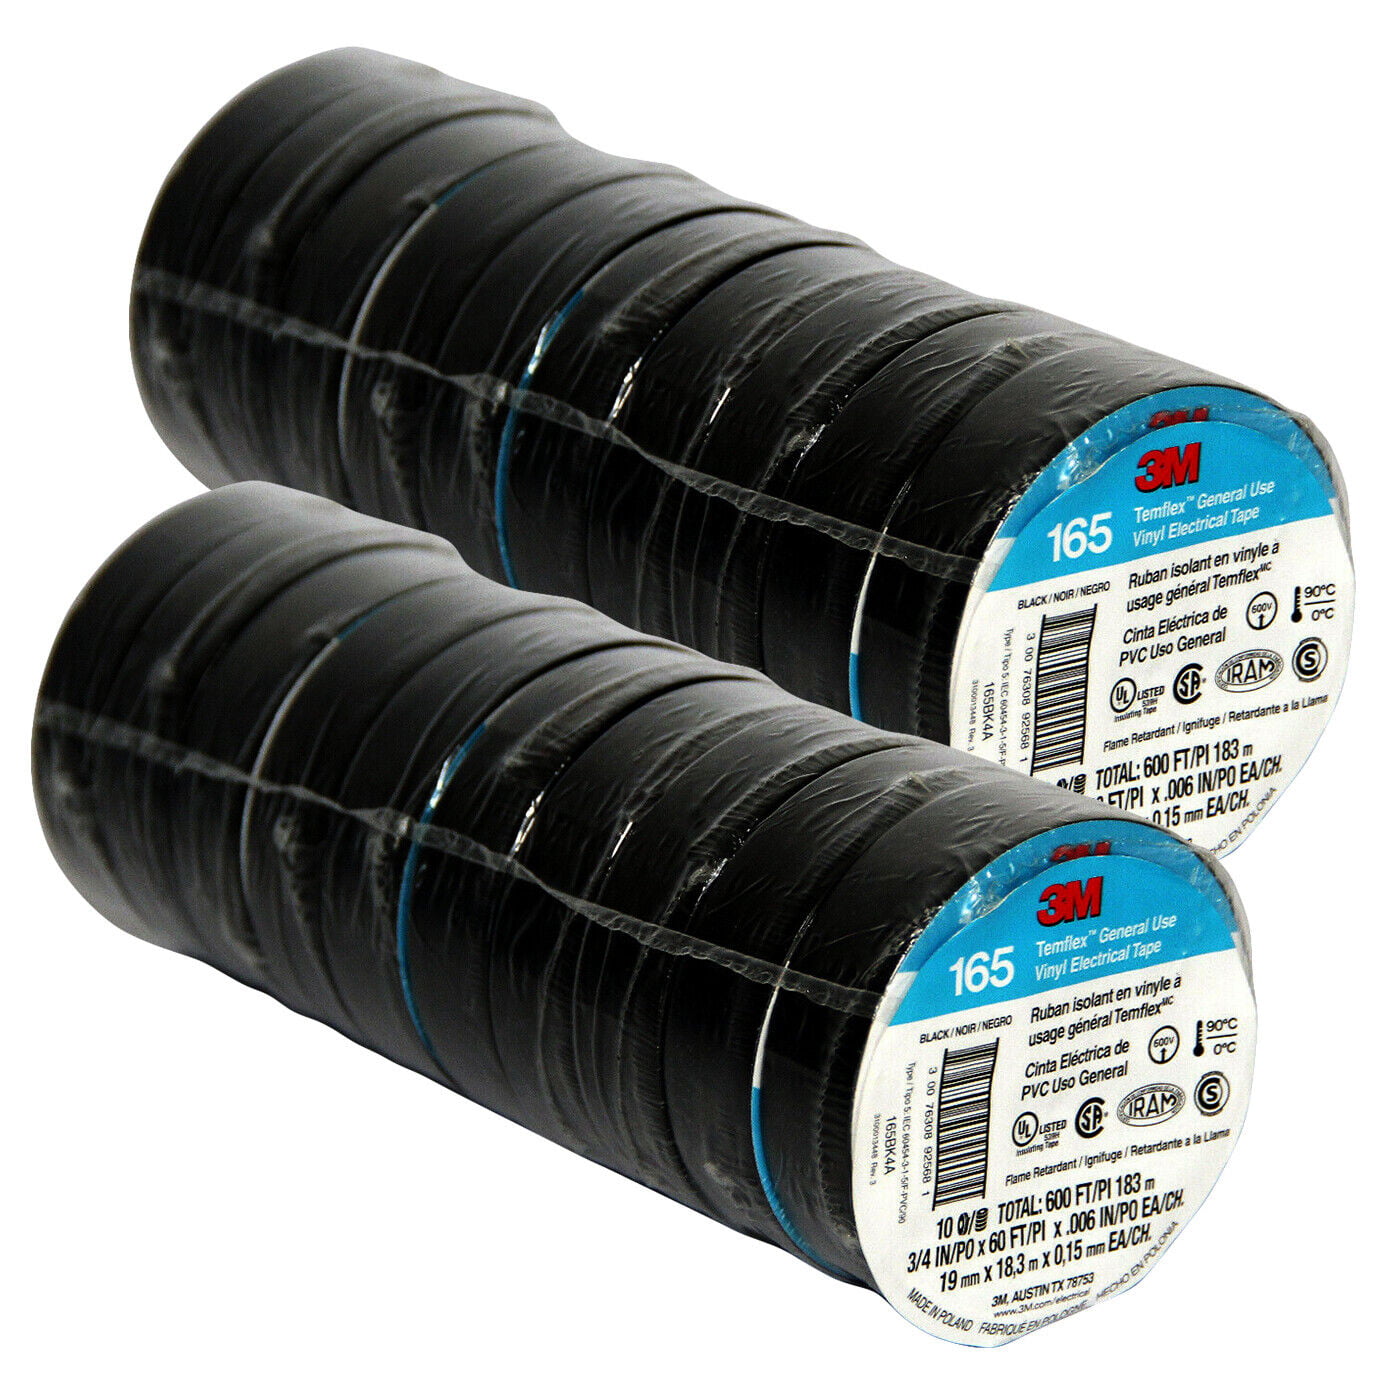 Double Sided Craft Tape Roll 4 inch Wide Head Over Boots Sign 1 Rolls 14.7ft Purpose 6.5inch Vinyl PVC Black Insulated Electrical Tape, Adult Unisex